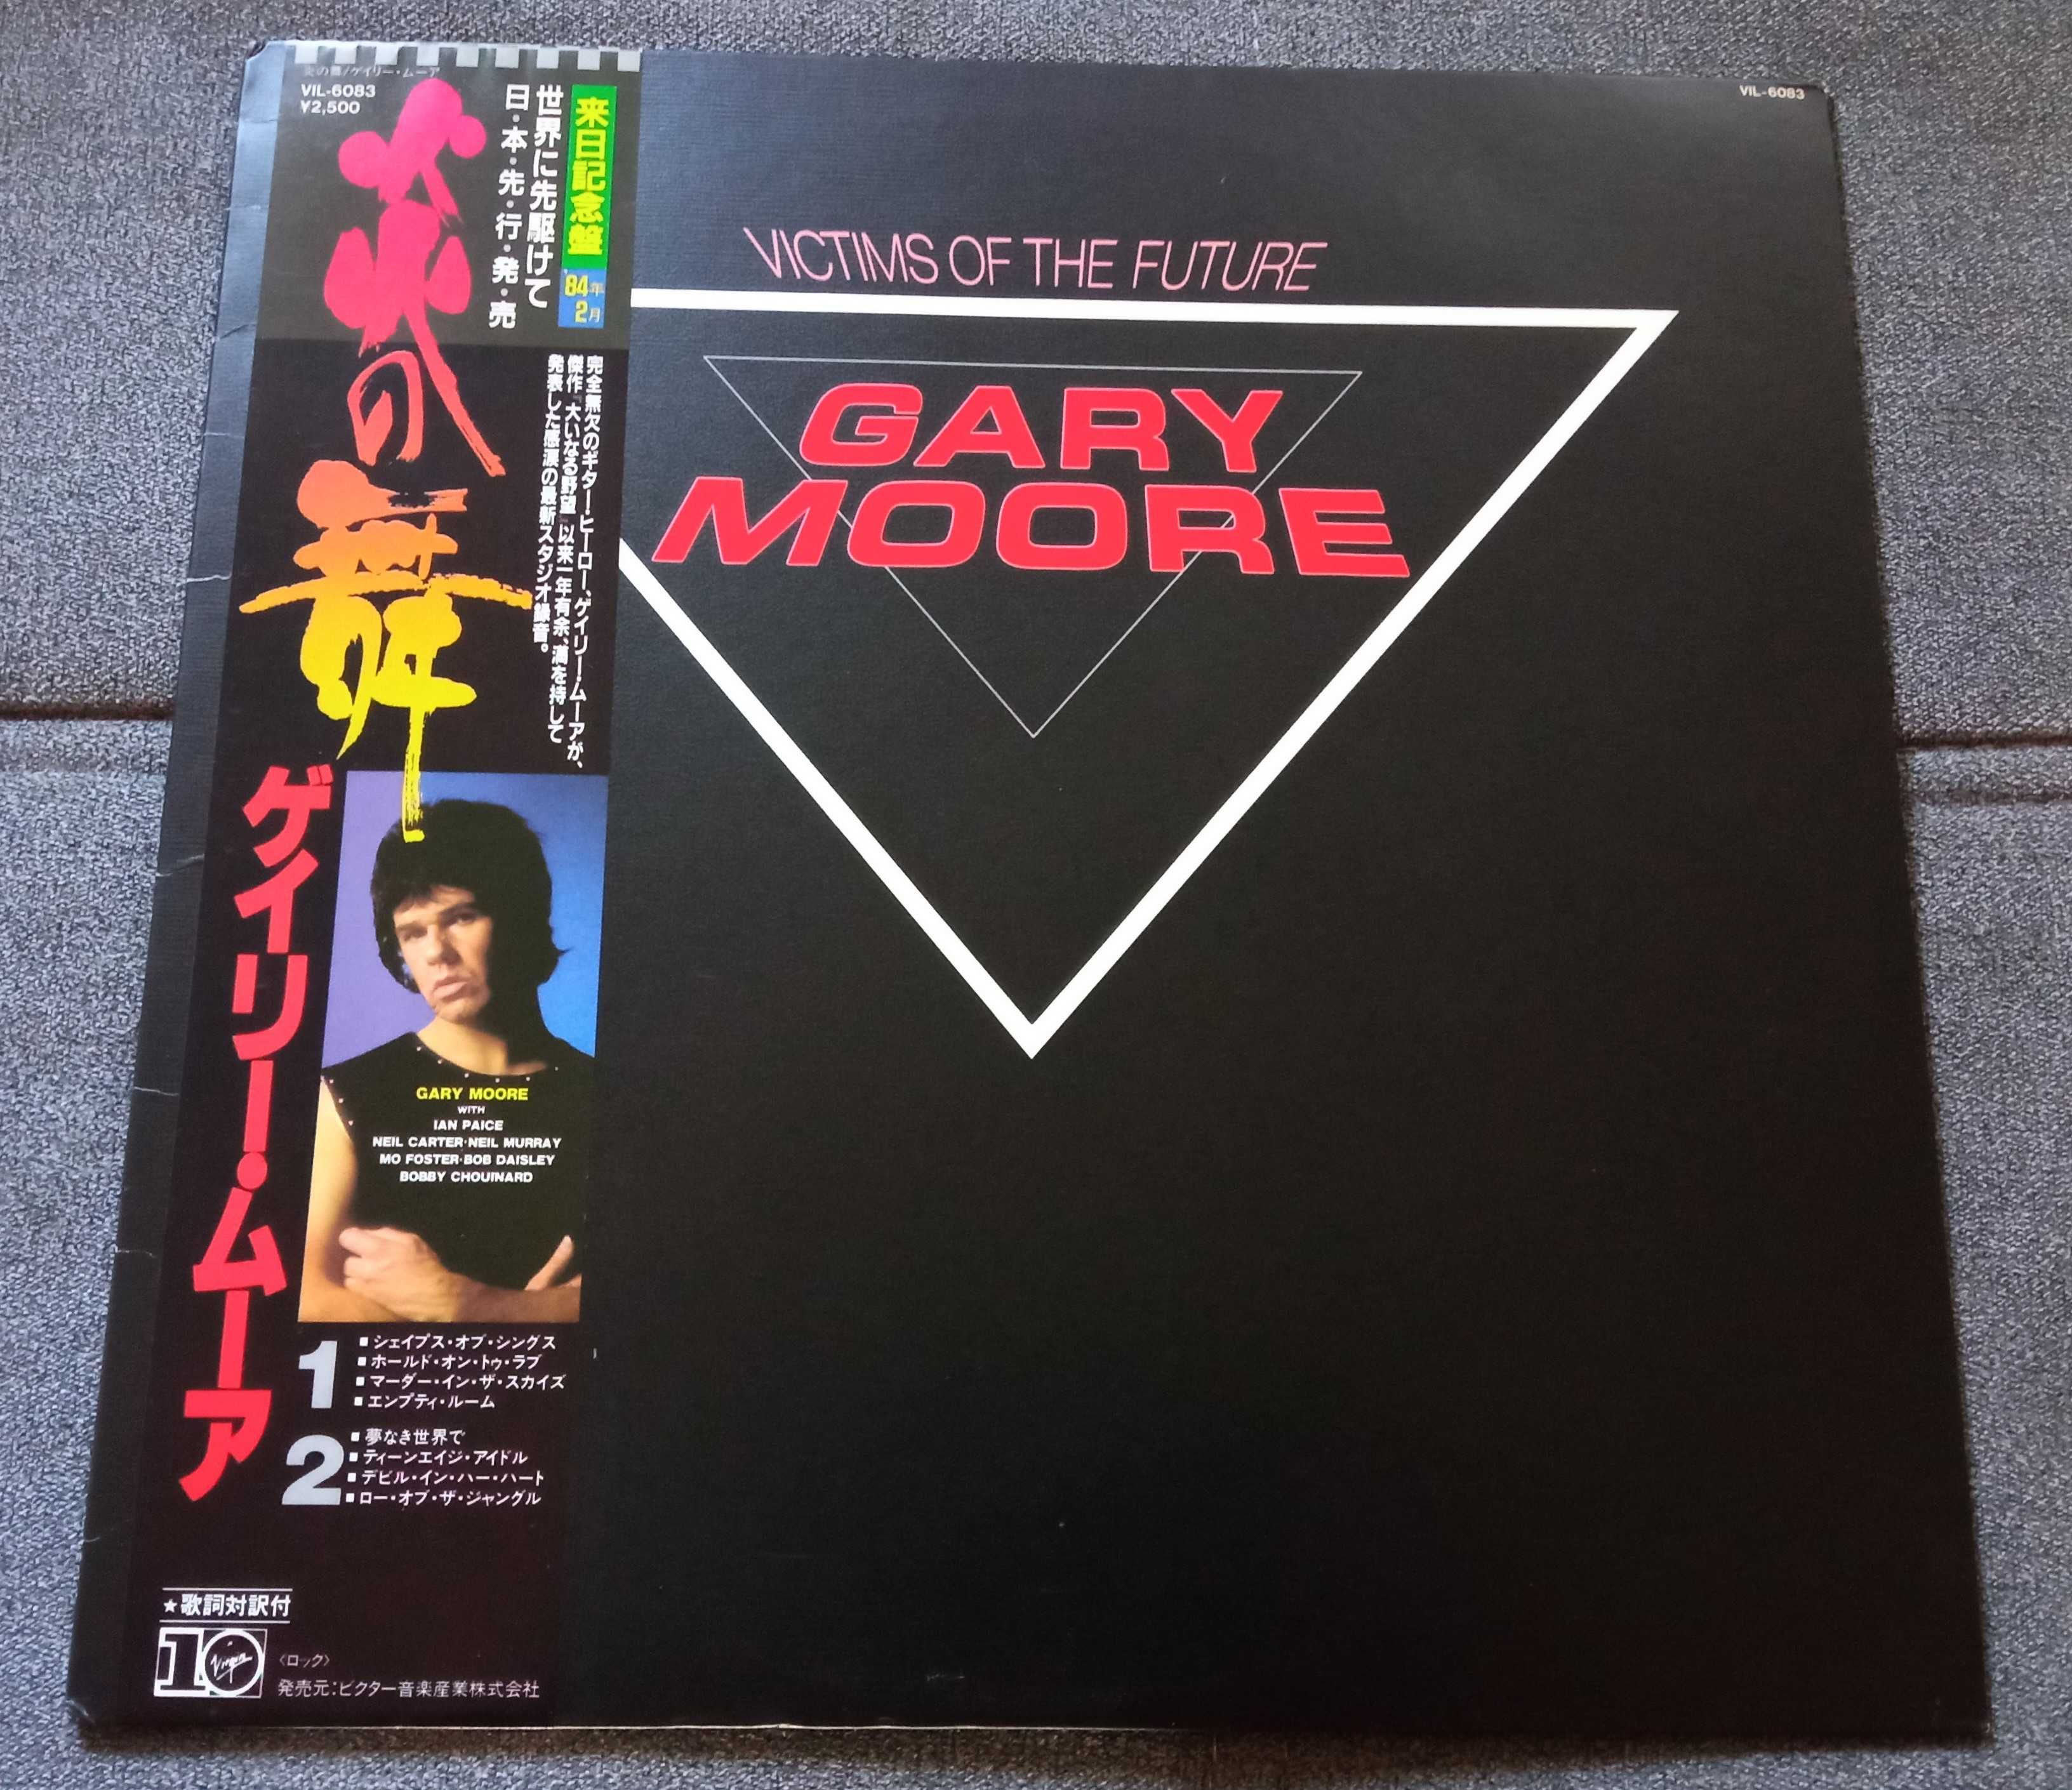 Gary Moore Victims Of The Future 1984r. Japan Obi